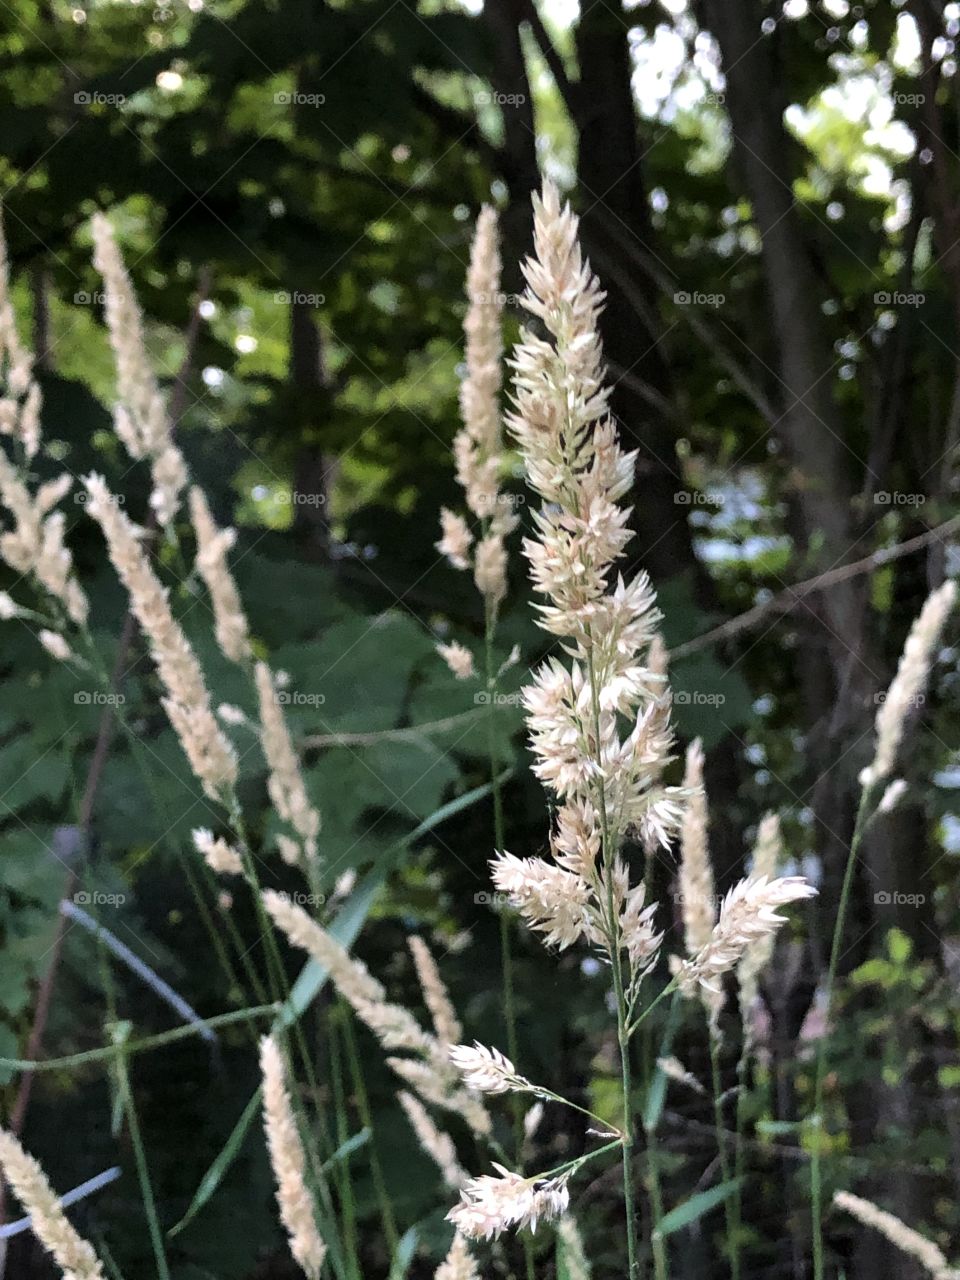 Reed Canary Grass, an invasive weed I found in my backyard